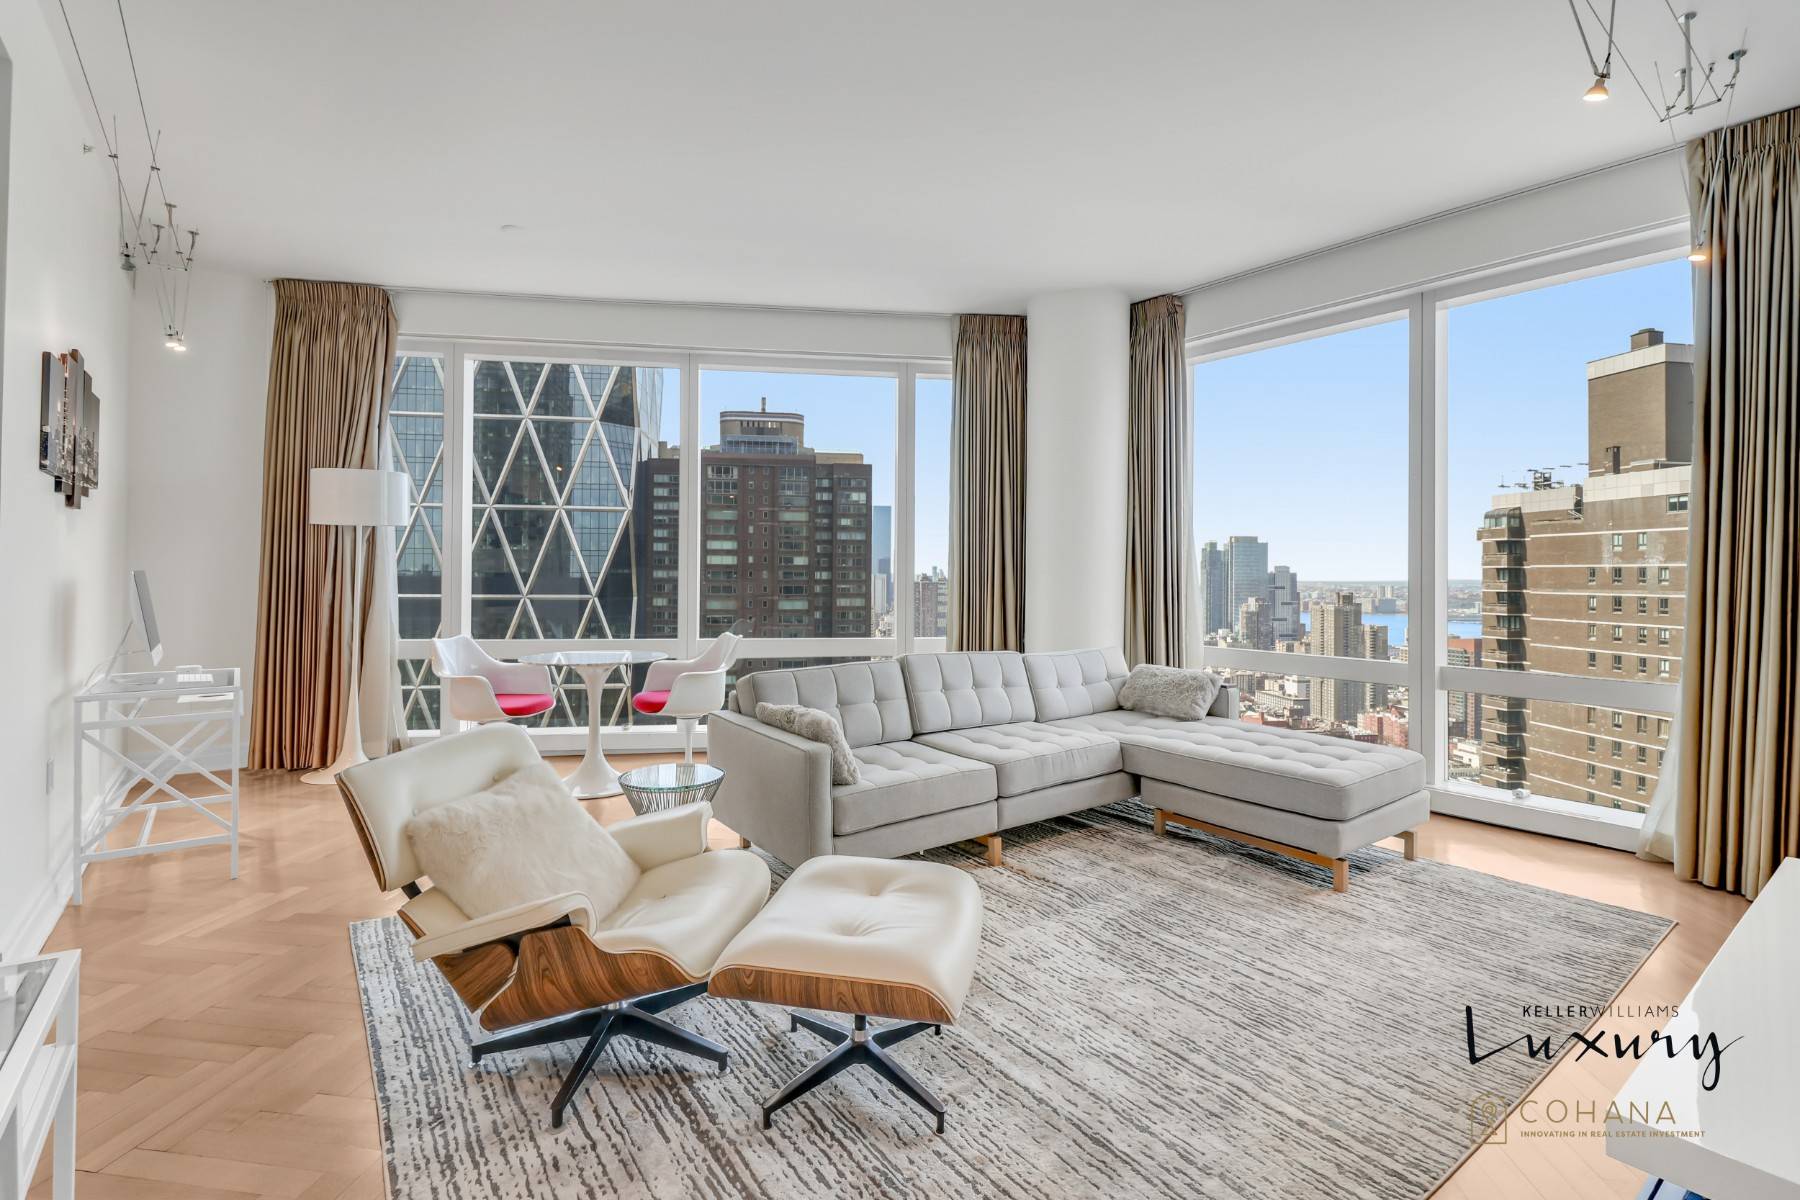 ENJOY PEACEFUL RIVER VIEWS HIGH ABOVE THE HEART OF NYC'S CULTURAL CENTER Ultimate luxury and serenity await you in this oversized split two bedroom retreat.